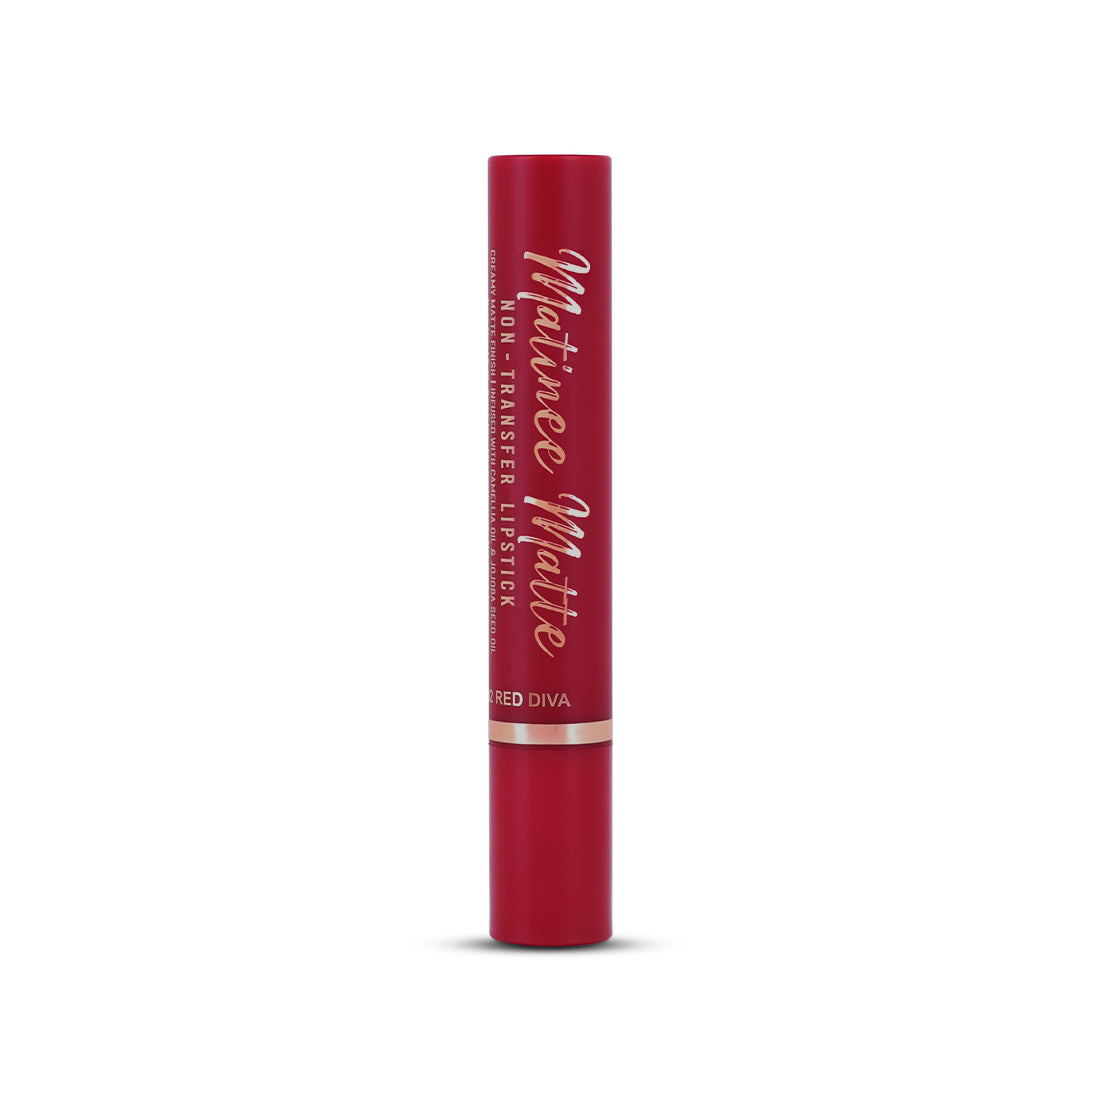 Mattlook Matinee Matte Non Transfer Lipstick, Creamy matte Finish, Infused with camellia oil and jojoba seed oil, Suitable for all Skin tones, Lippy Red, 2.4 gm